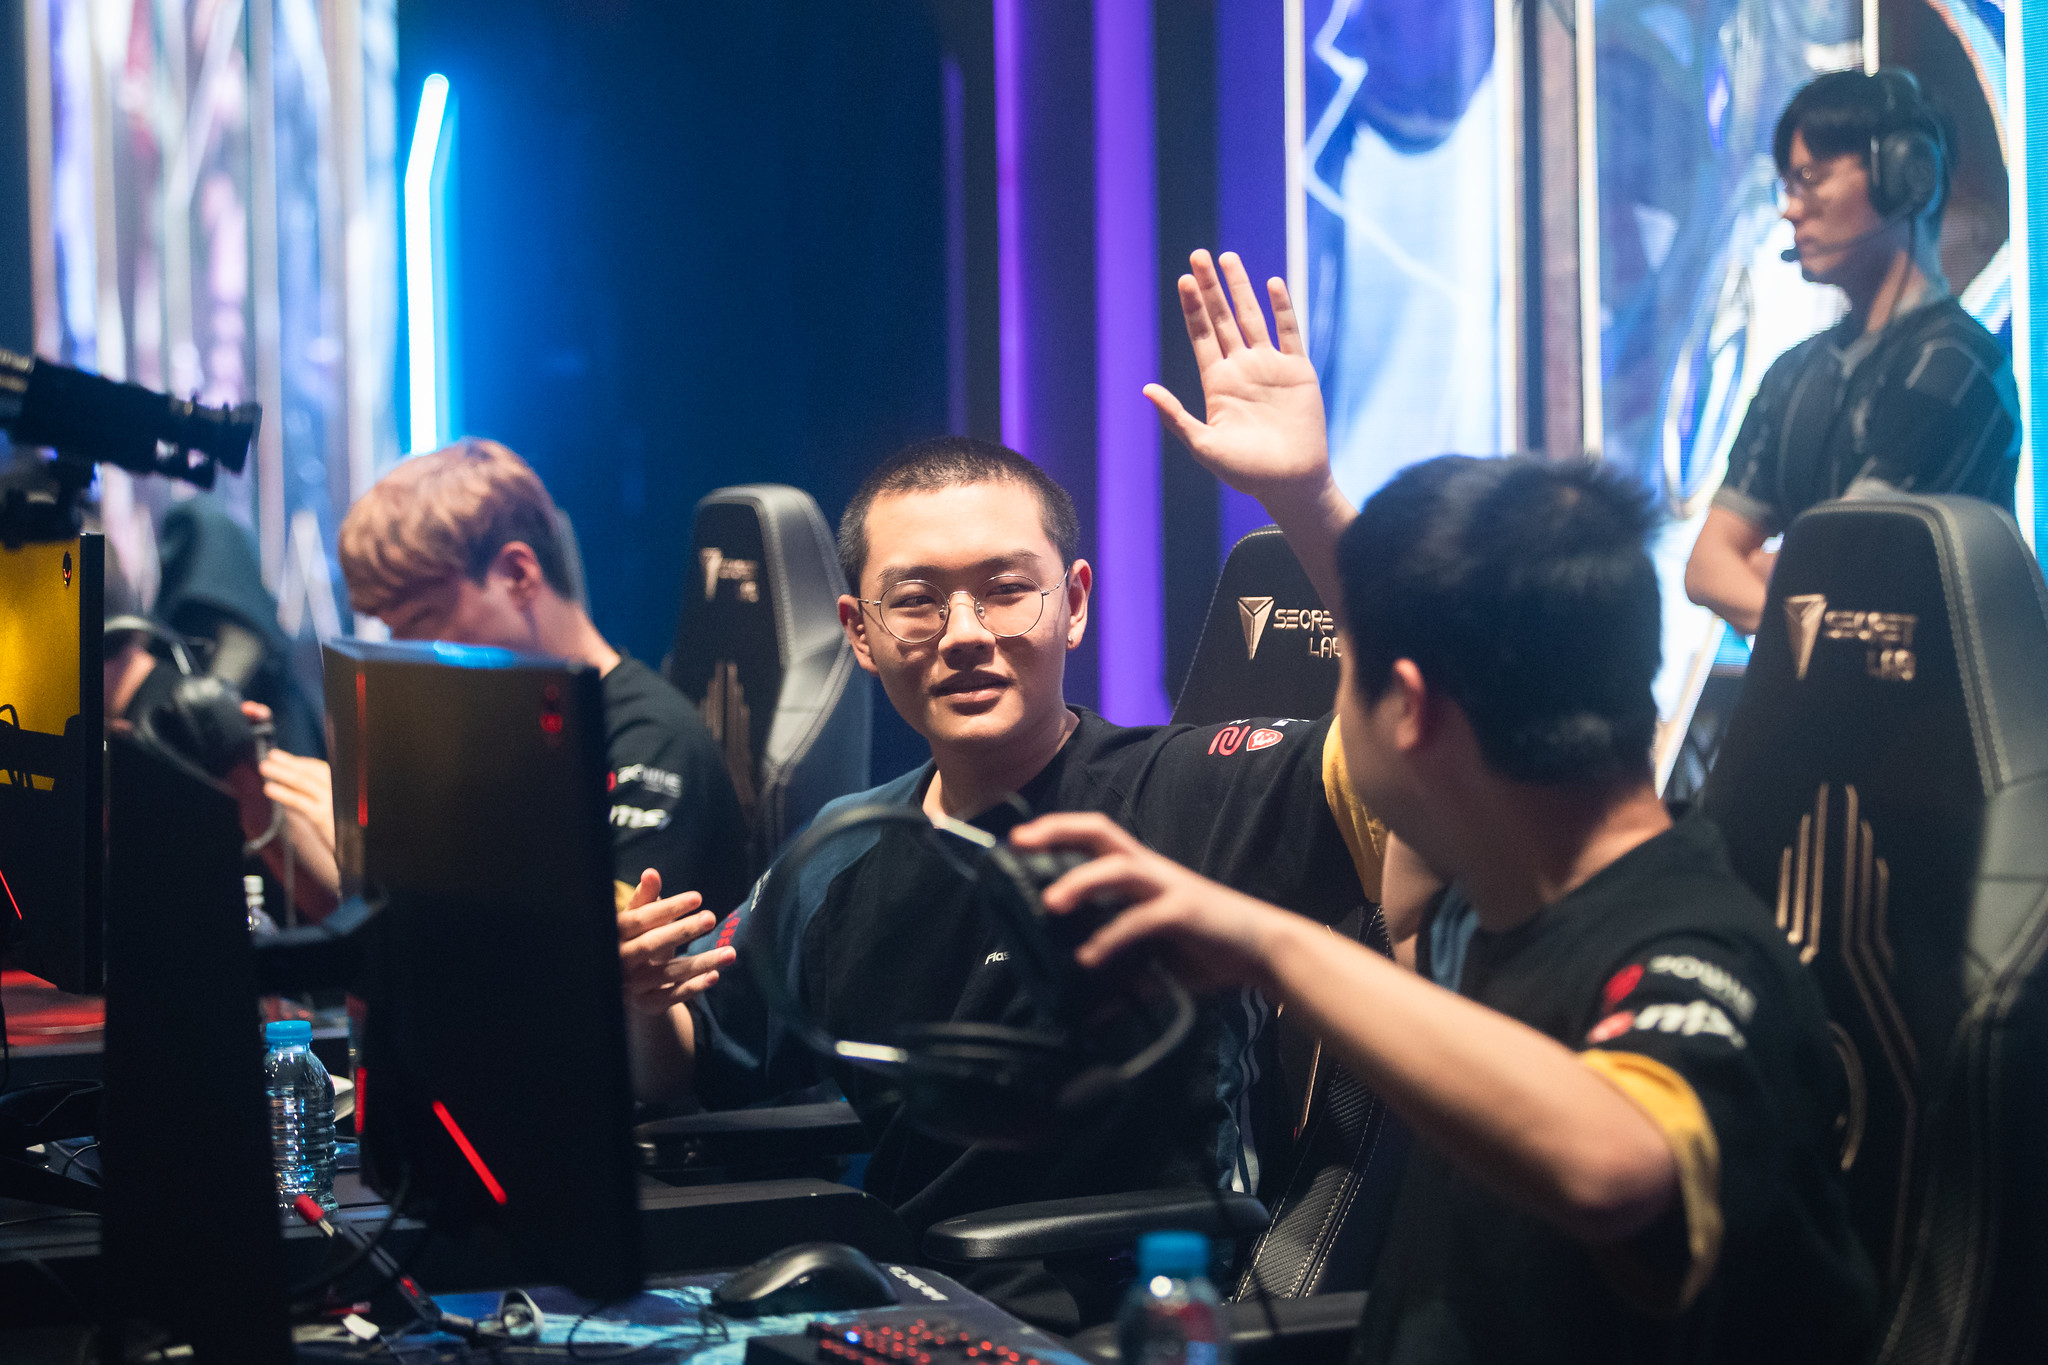 Royal Never Give Up Swept Vici Gaming In China’s LPL’s Summer Split 2020